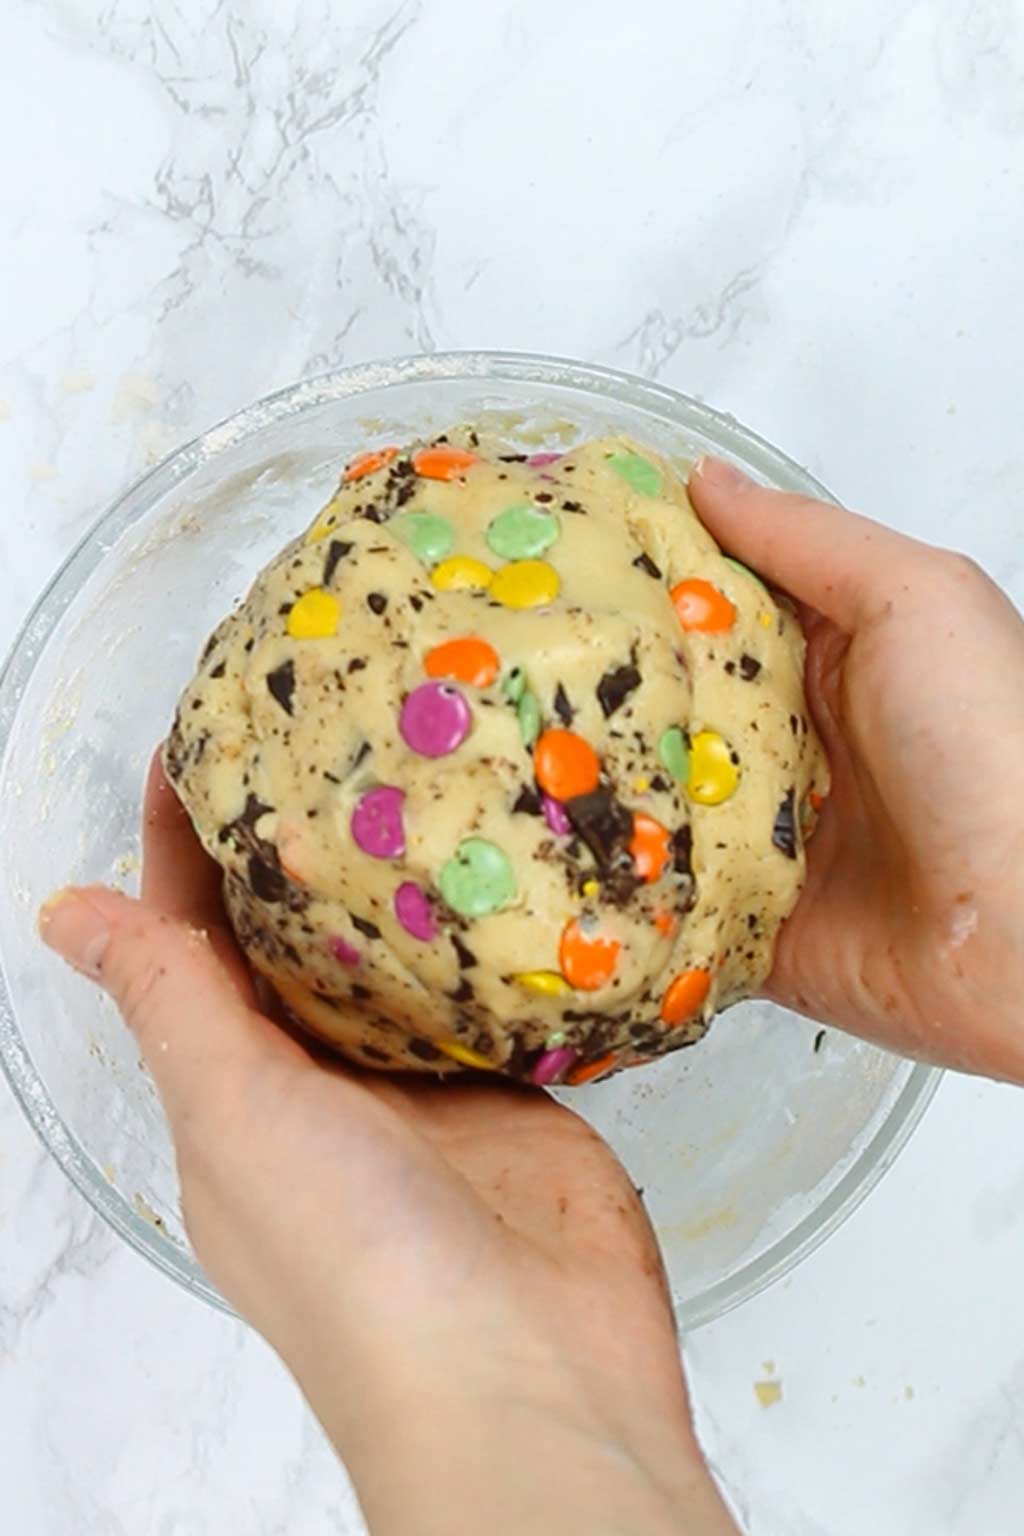 a ball of cookie dough with rainbow and chocolate chips in it